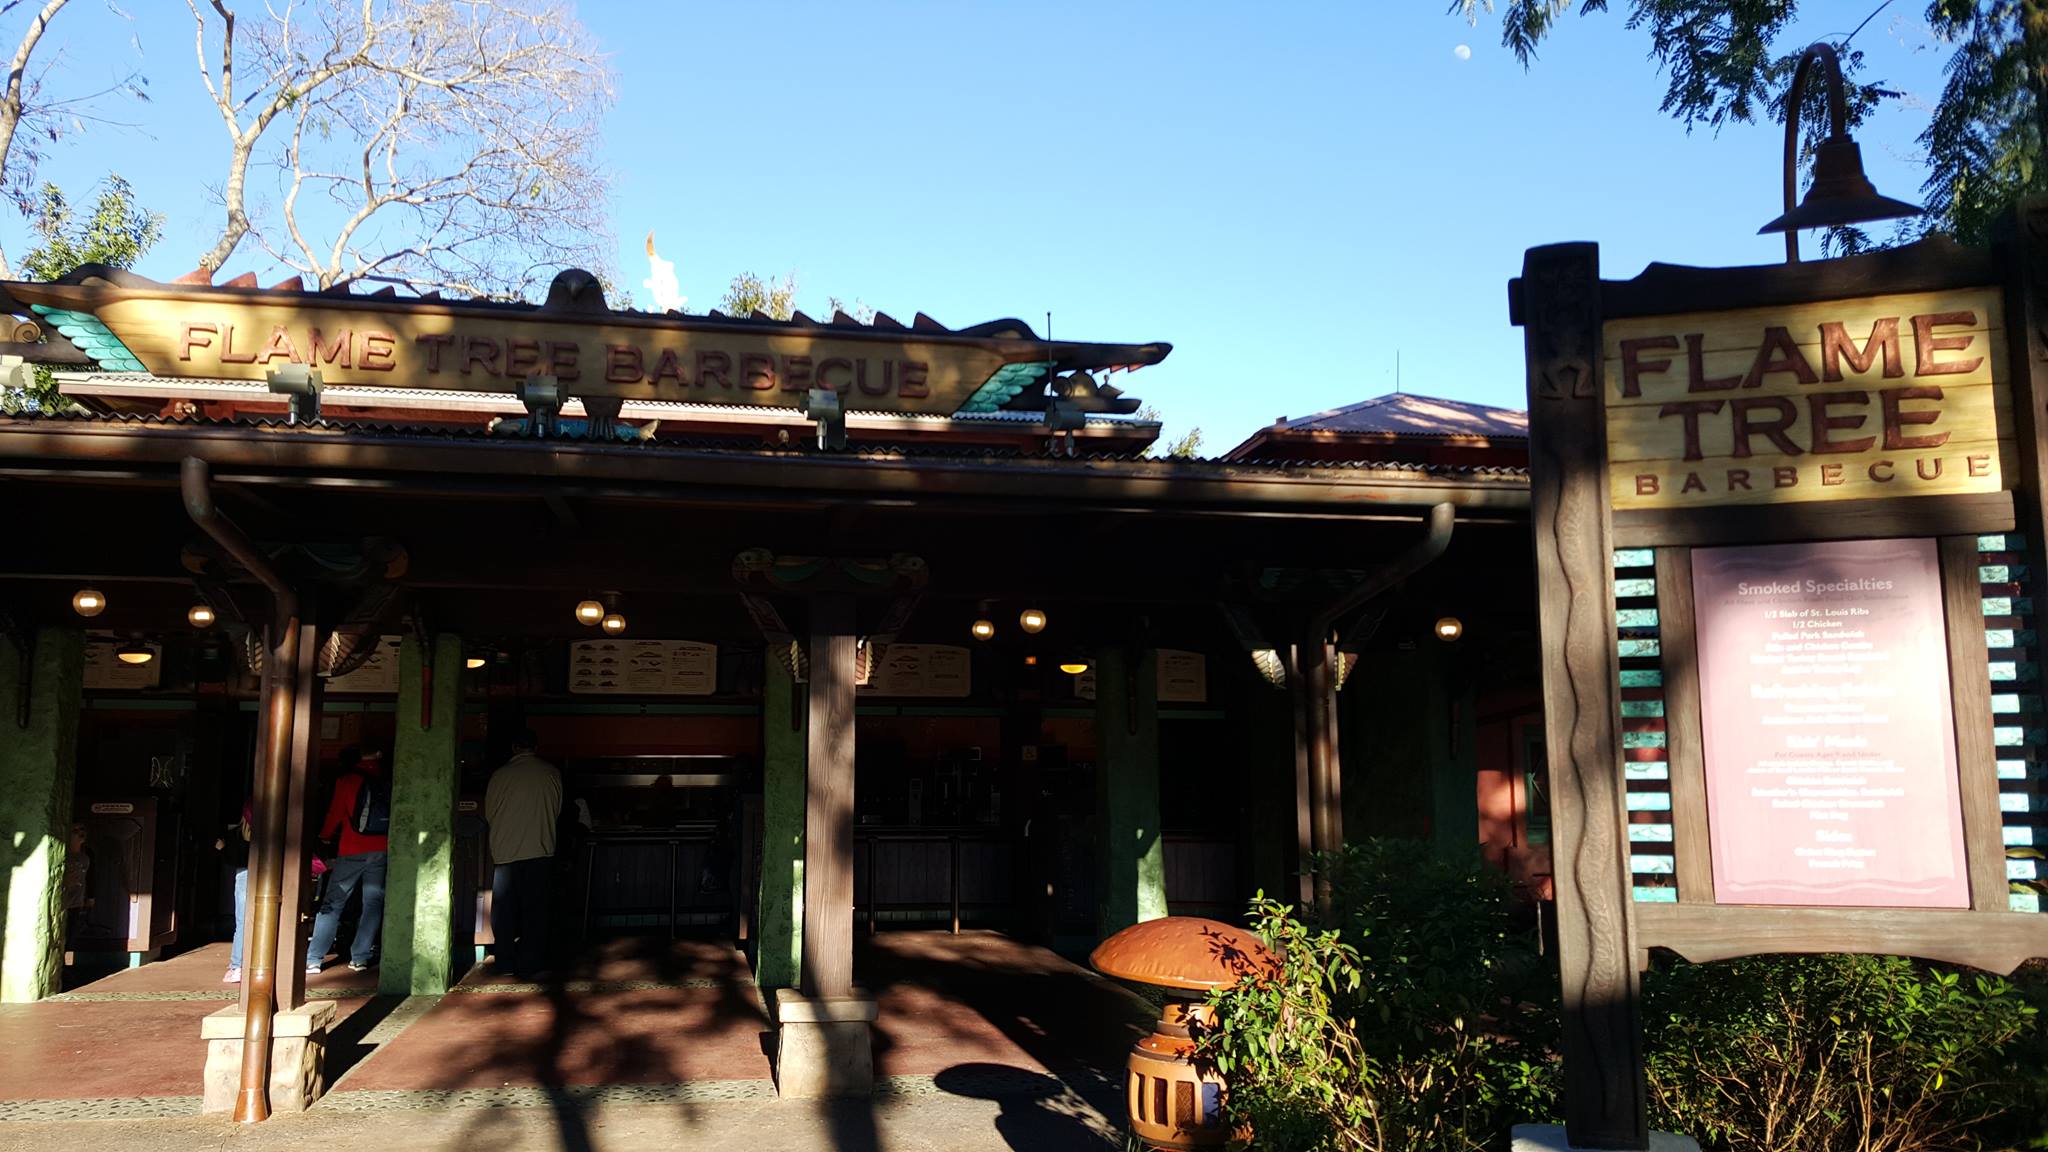 New Jungle Book Dining Packages being added at Animal Kingdom Park